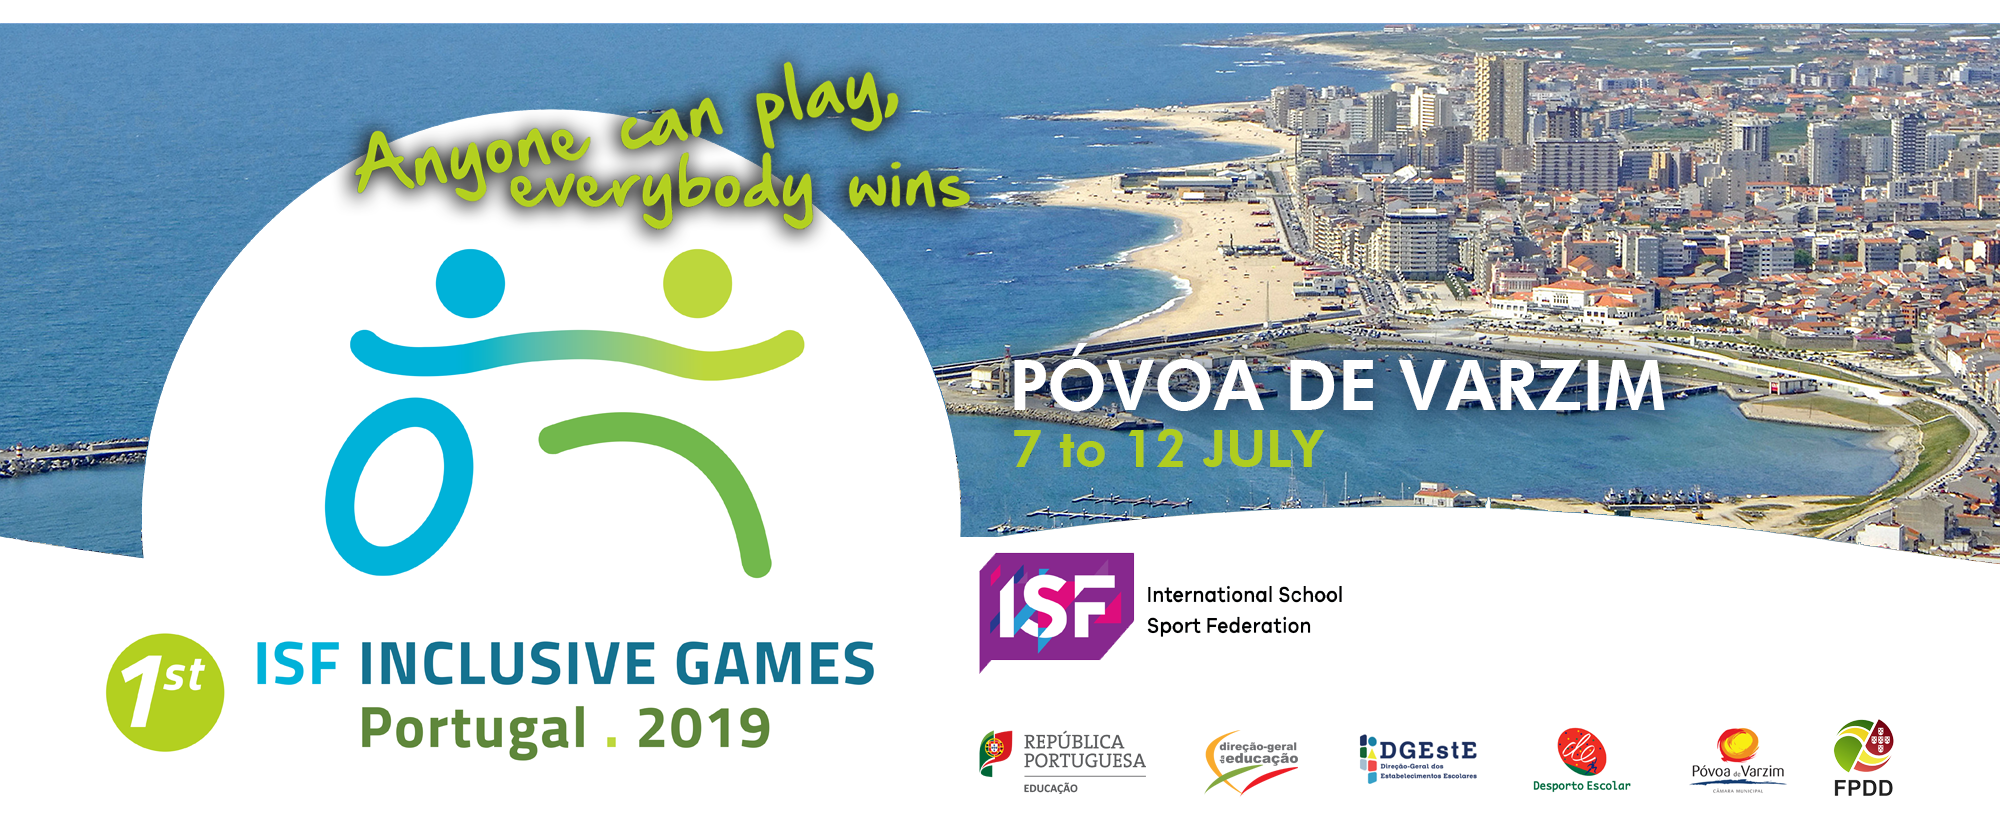 1st ISF Inclusive Games, Portugal, 2019 | Anyone can play, everybody wins